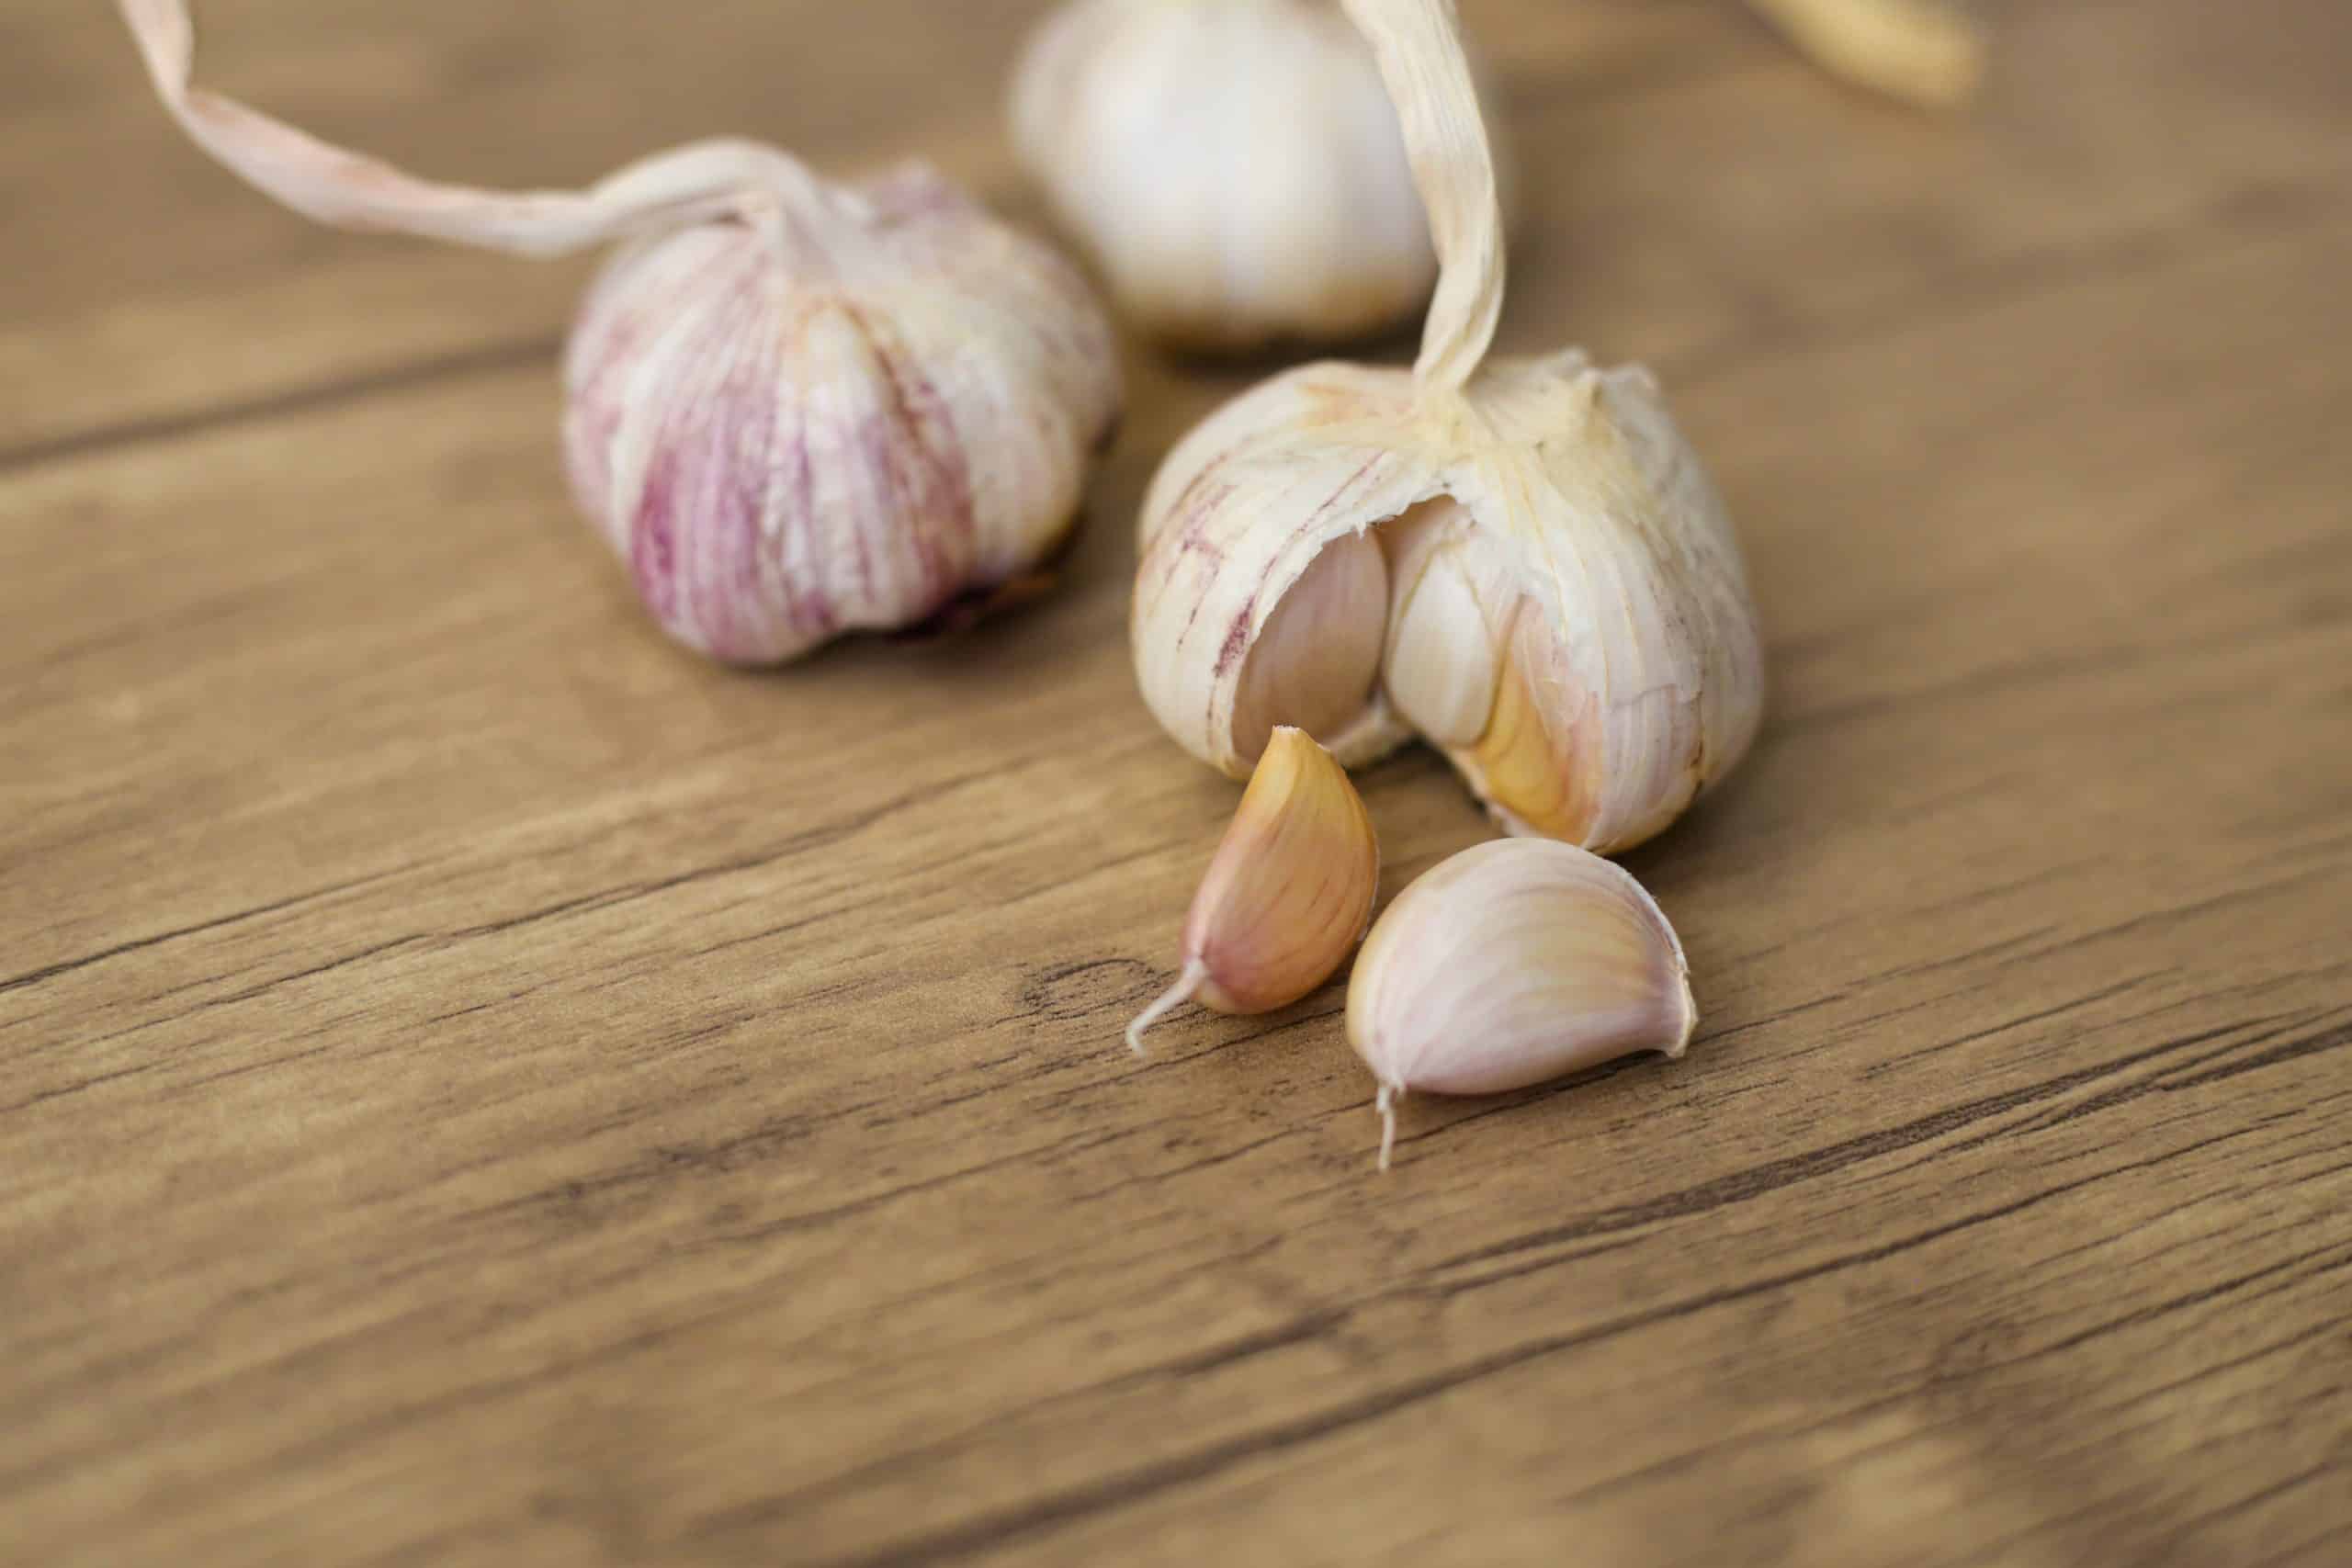 Spice up Your Cooking with a Garlic Herb Blend ﻿